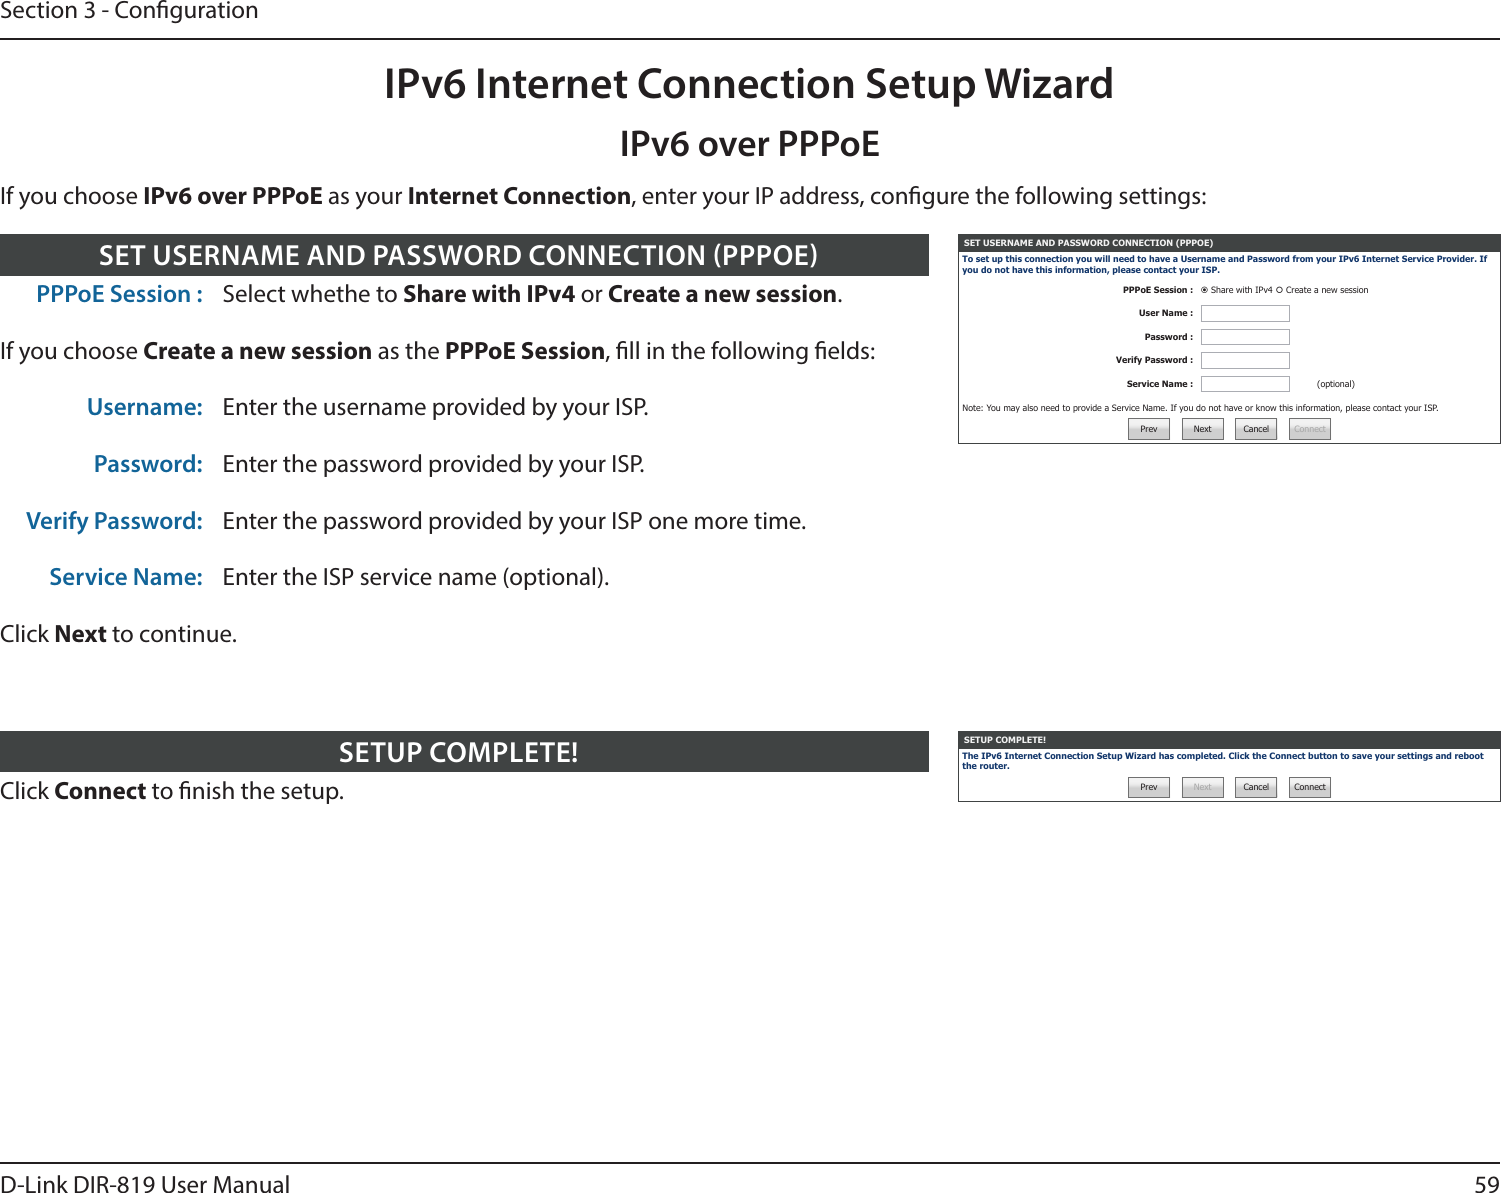 59D-Link DIR-819 User ManualSection 3 - CongurationIf you choose IPv6 over PPPoE as your Internet Connection, enter your IP address, congure the following settings:IPv6 over PPPoEIPv6 Internet Connection Setup WizardClick Connect to nish the setup.SETUP COMPLETE! SETUP COMPLETE!The IPv6 Internet Connection Setup Wizard has completed. Click the Connect button to save your settings and reboot the router.Prev Next Cancel ConnectPPPoE Session : Select whethe to Share with IPv4 or Create a new session.If you choose Create a new session as the PPPoE Session, ll in the following elds:Username: Enter the username provided by your ISP.Password: Enter the password provided by your ISP.Verify Password: Enter the password provided by your ISP one more time.Service Name: Enter the ISP service name (optional).Click Next to continue.SET USERNAME AND PASSWORD CONNECTION PPPOE SET USERNAME AND PASSWORD CONNECTION (PPPOE)To set up this connection you will need to have a Username and Password from your IPv6 Internet Service Provider. If you do not have this information, please contact your ISP.PPPoE Session :  Share with IPv4  Create a new sessionUser Name :Password :Verify Password :Service Name : (optional)Note: You may also need to provide a Service Name. If you do not have or know this information, please contact your ISP.Prev Next Cancel Connect